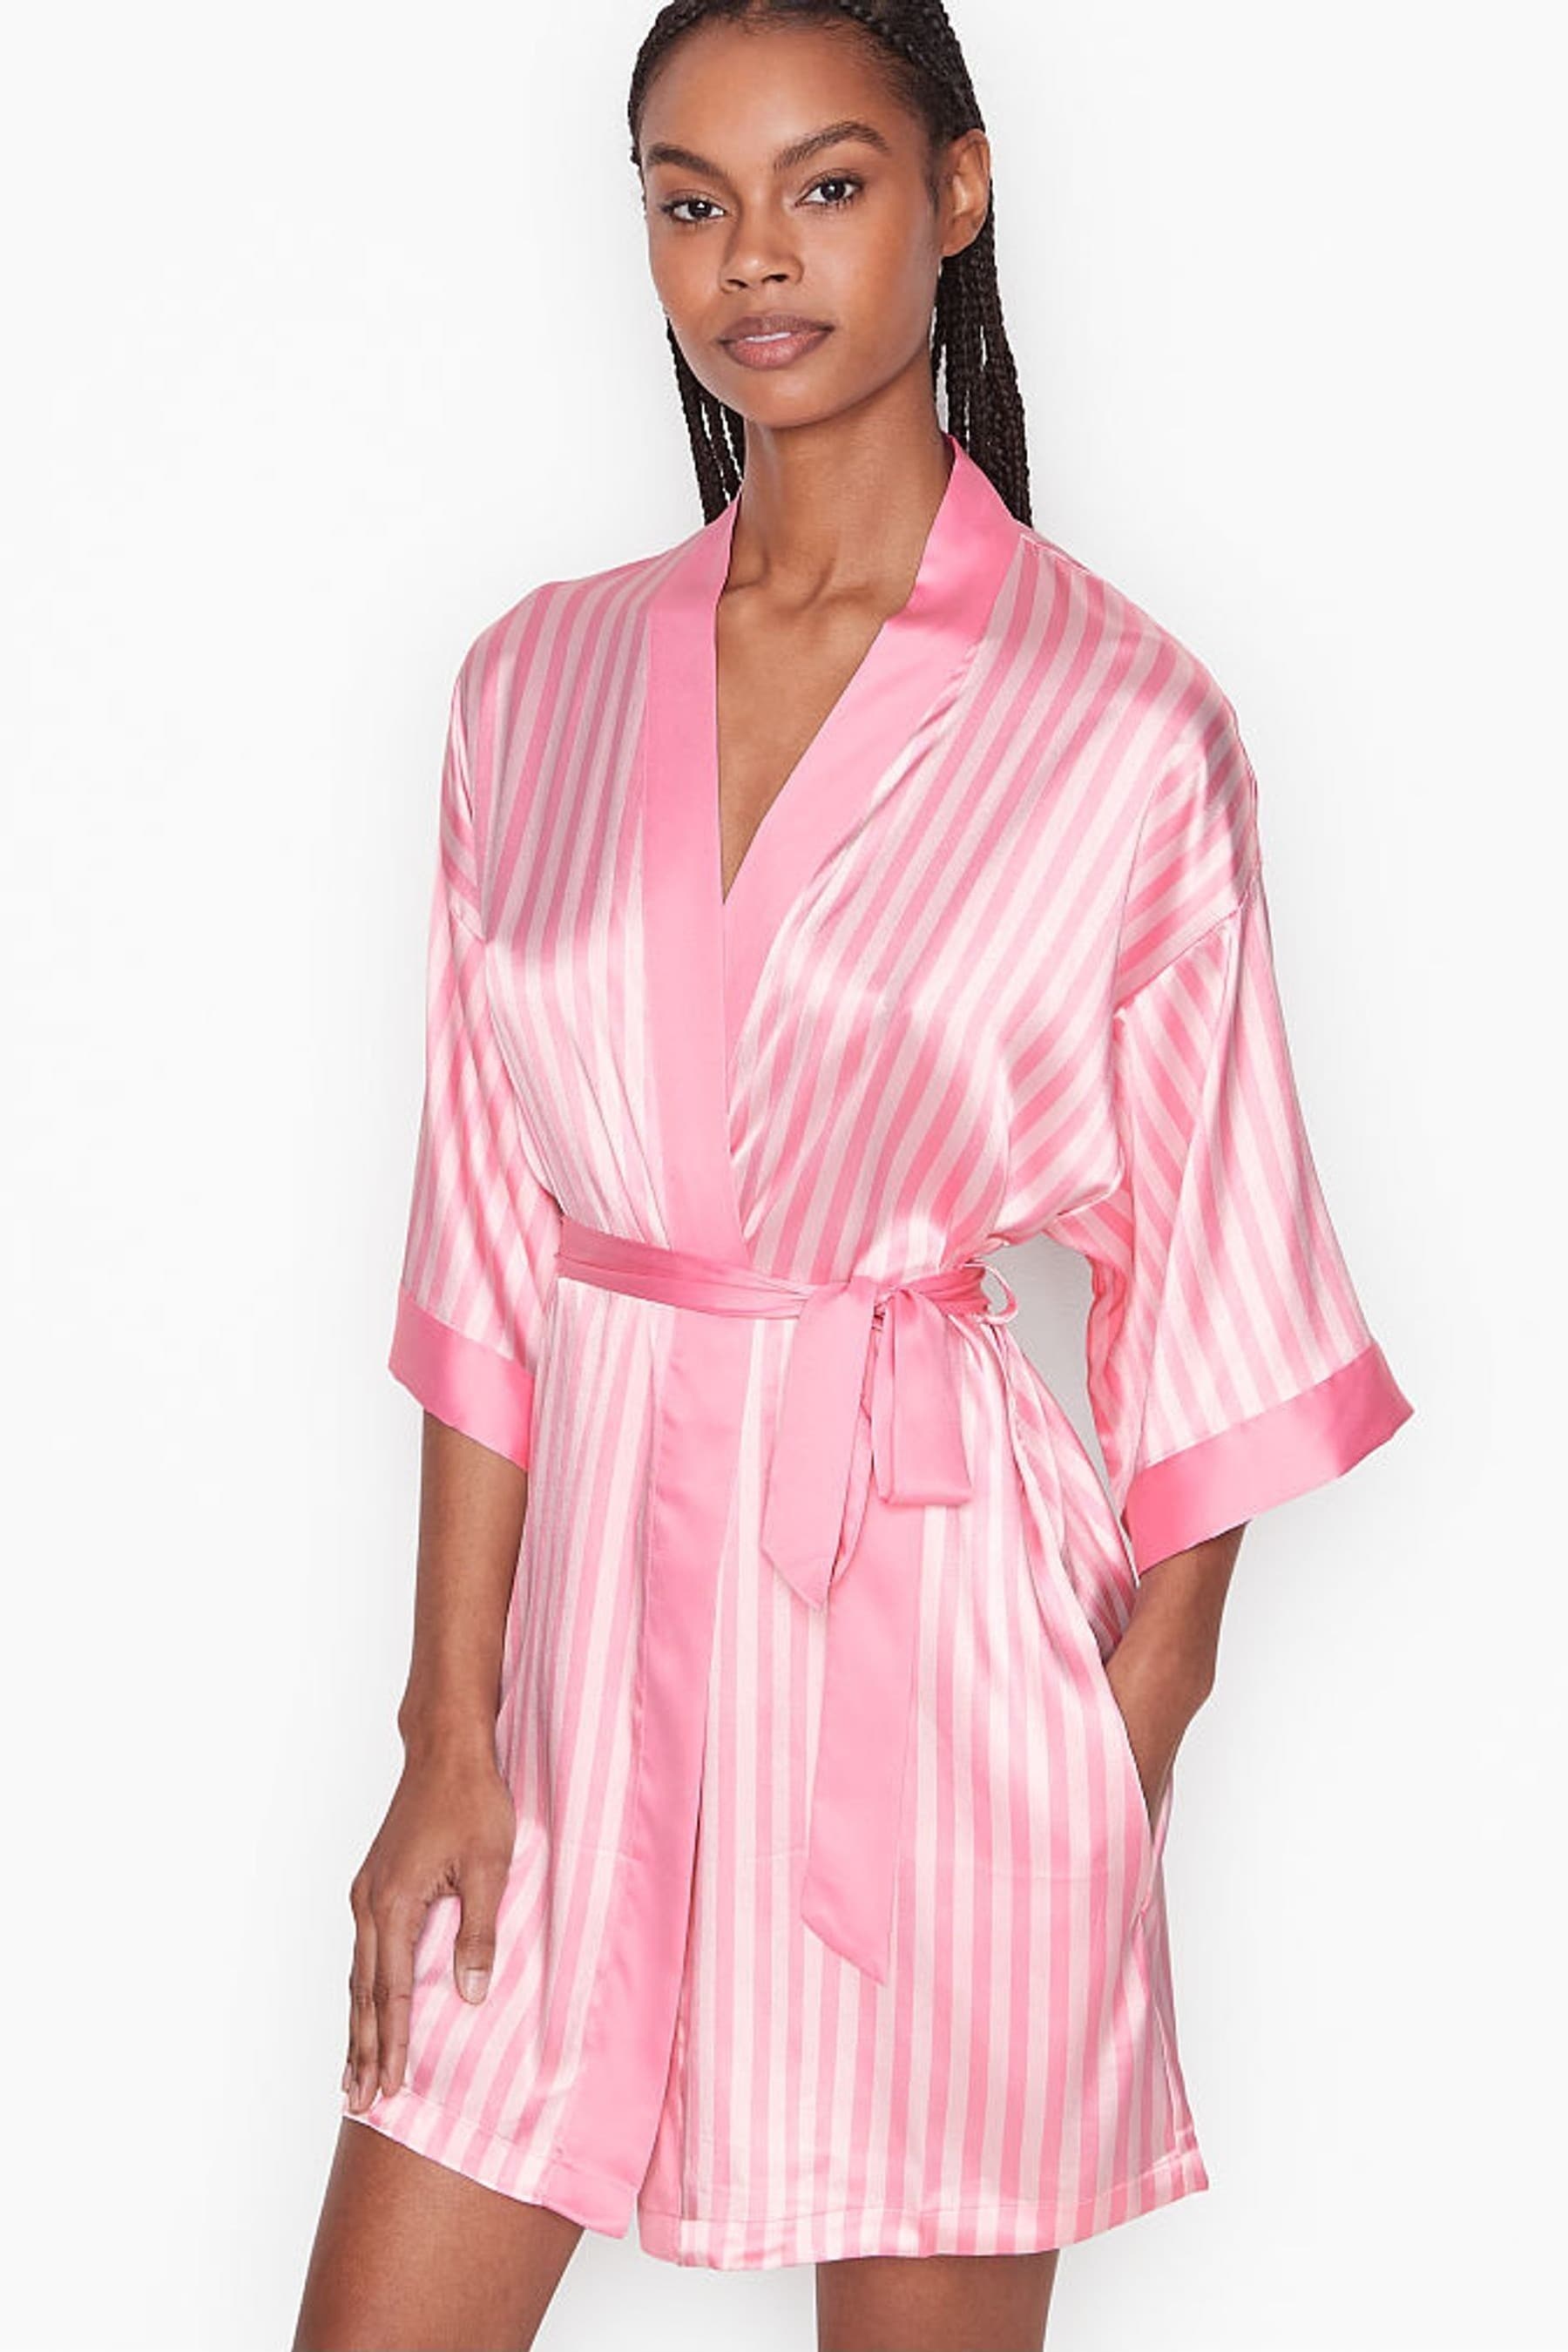 Buy Victoria's Secret Flounce Satin Dressing Gown from the Next UK